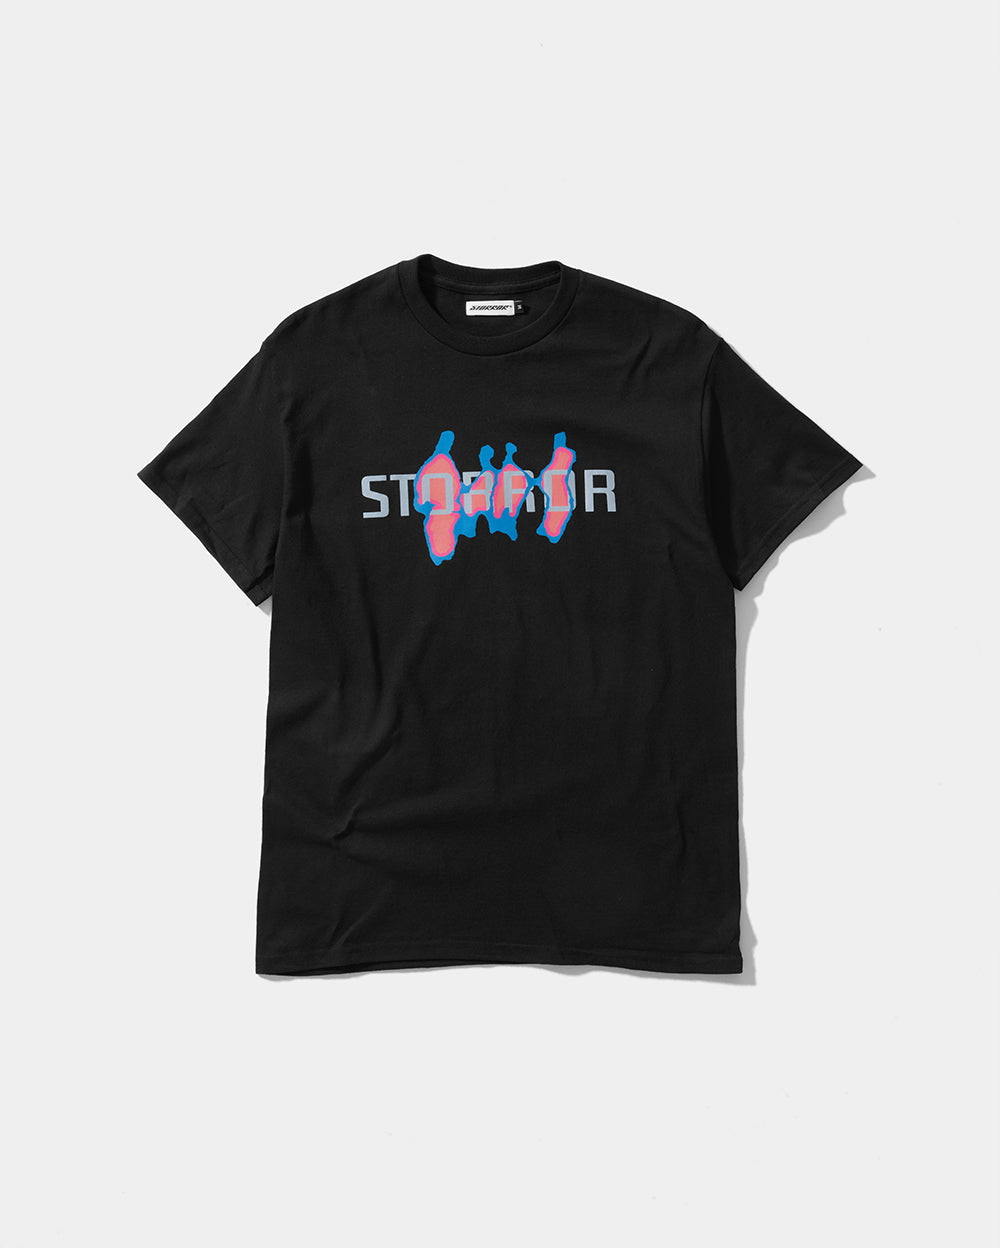 THERMAL T-SHIRT - BLACK | STORROR | Parkour Clothing